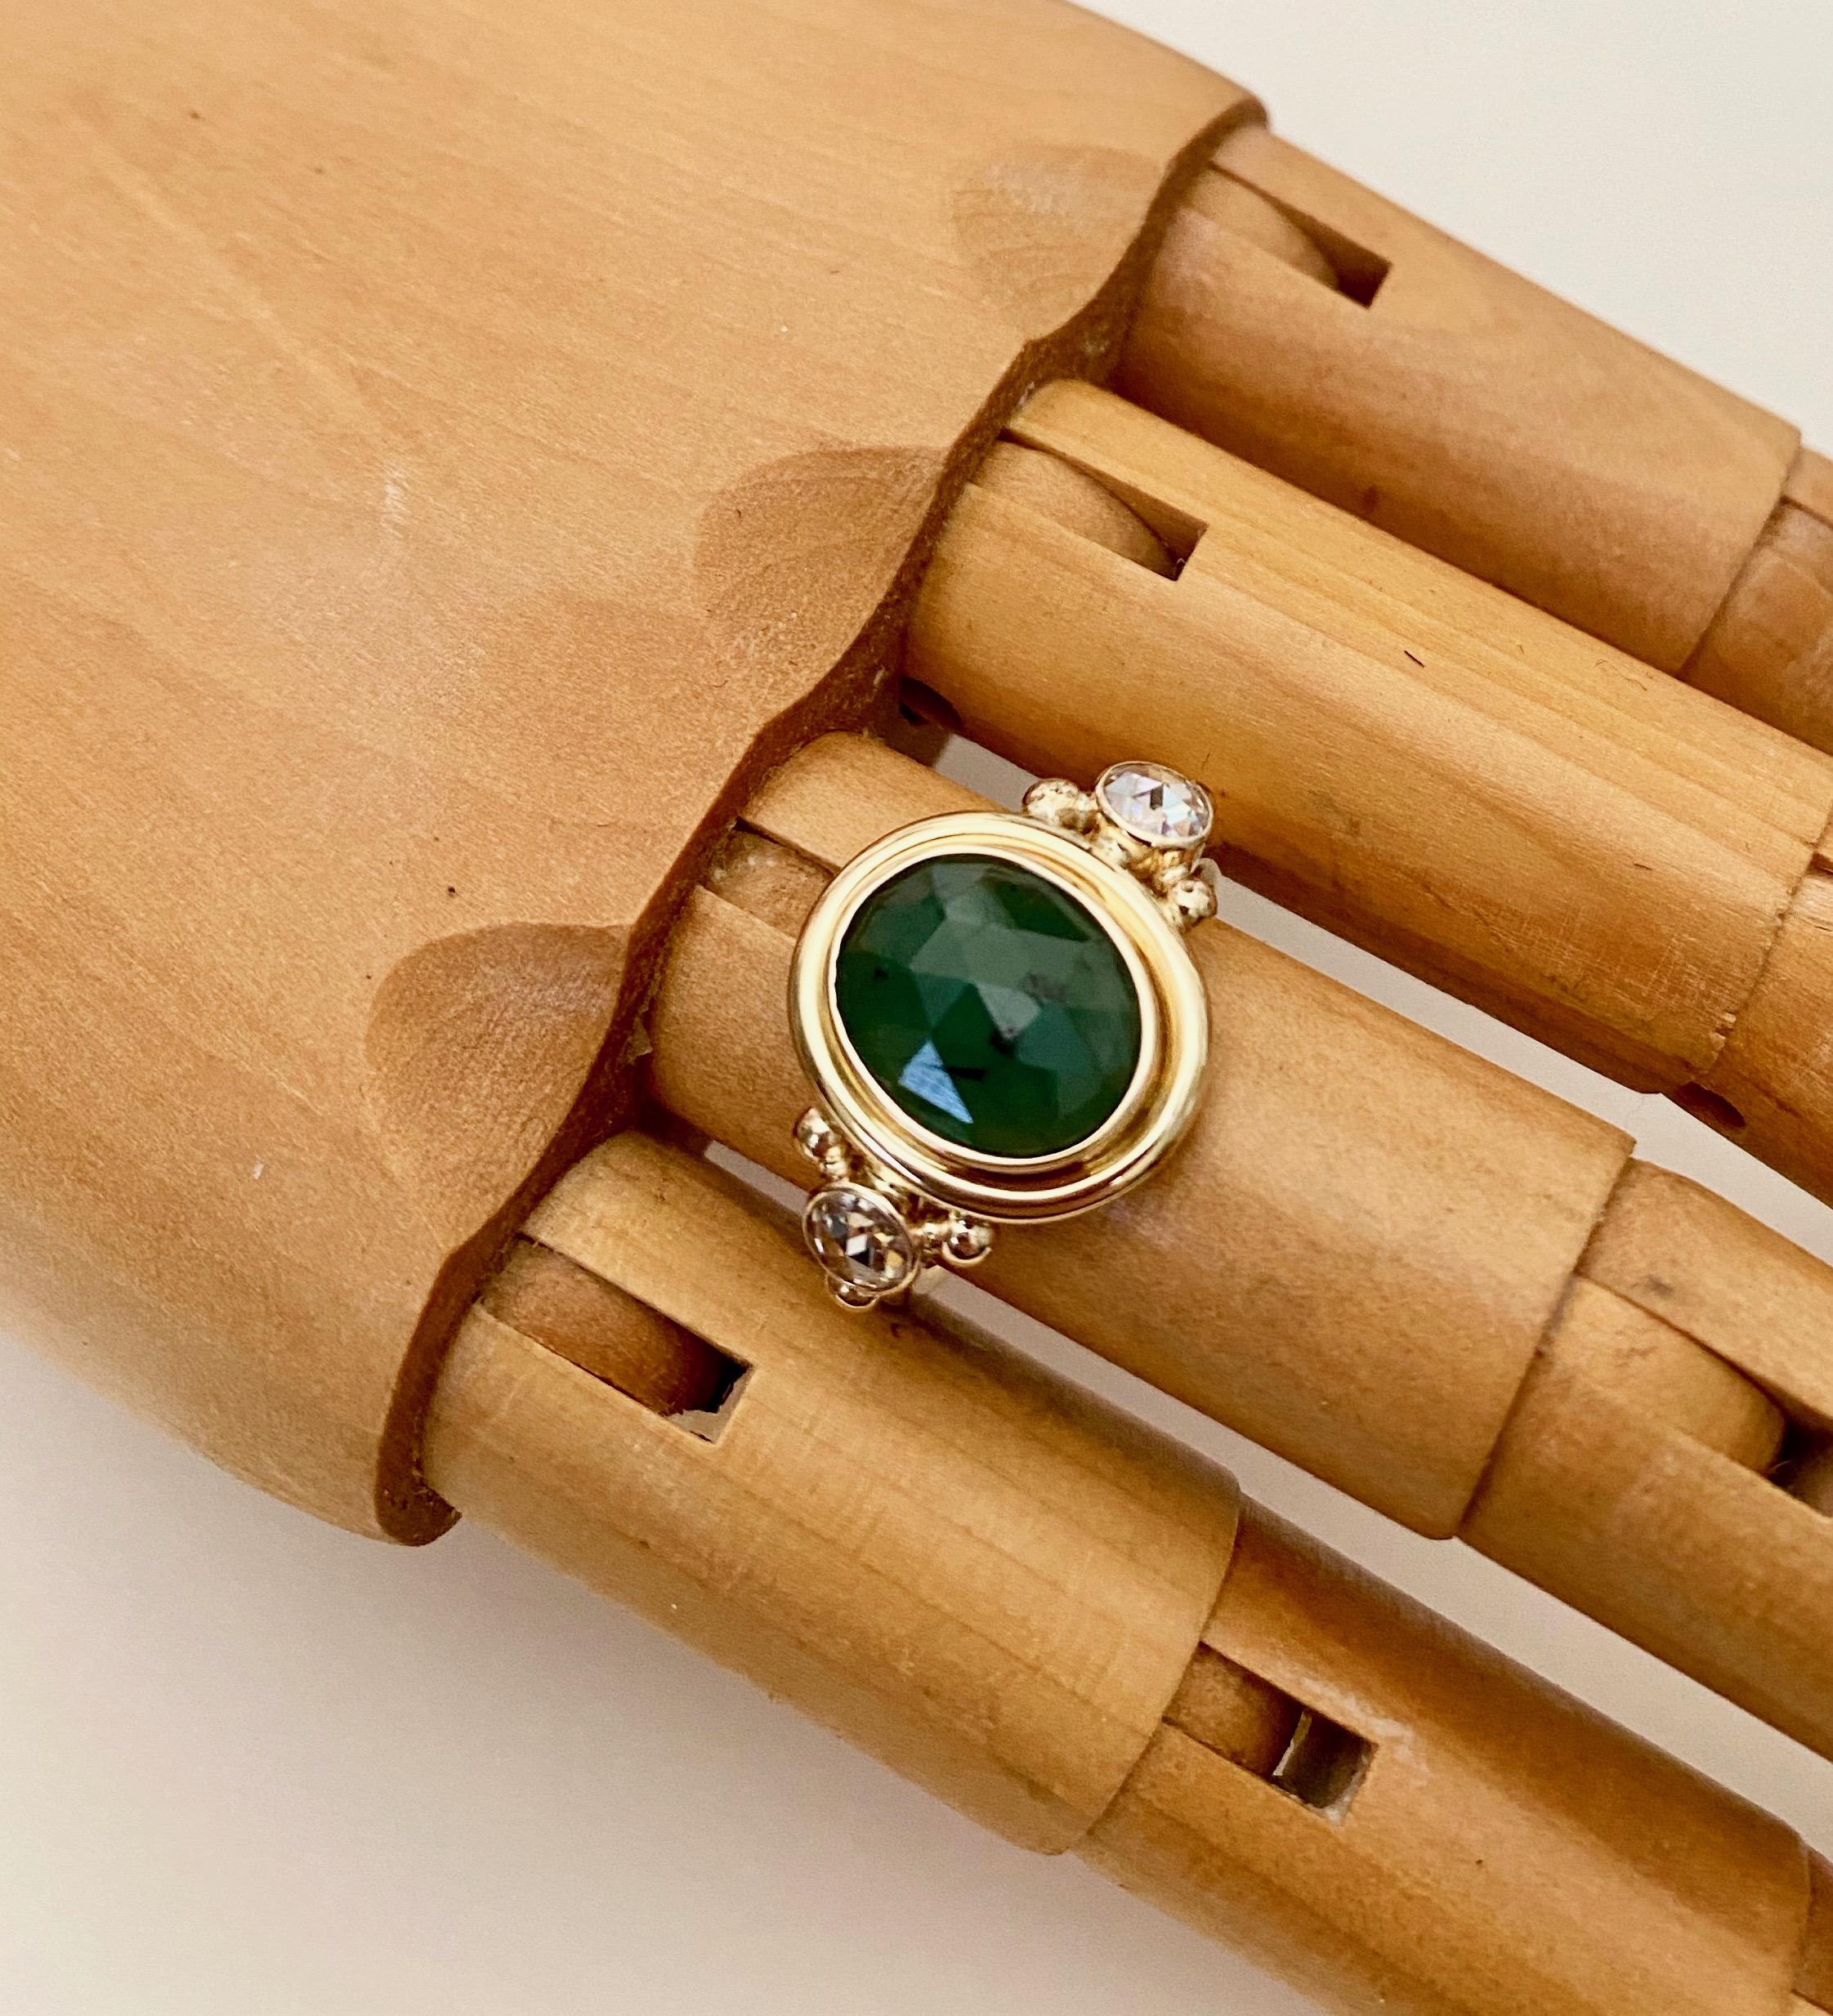 A rose cut emerald (origin: Brazil) is featured in this one-of-a-kind, archaic style cocktail ring.  The oval cut emerald is a rich 